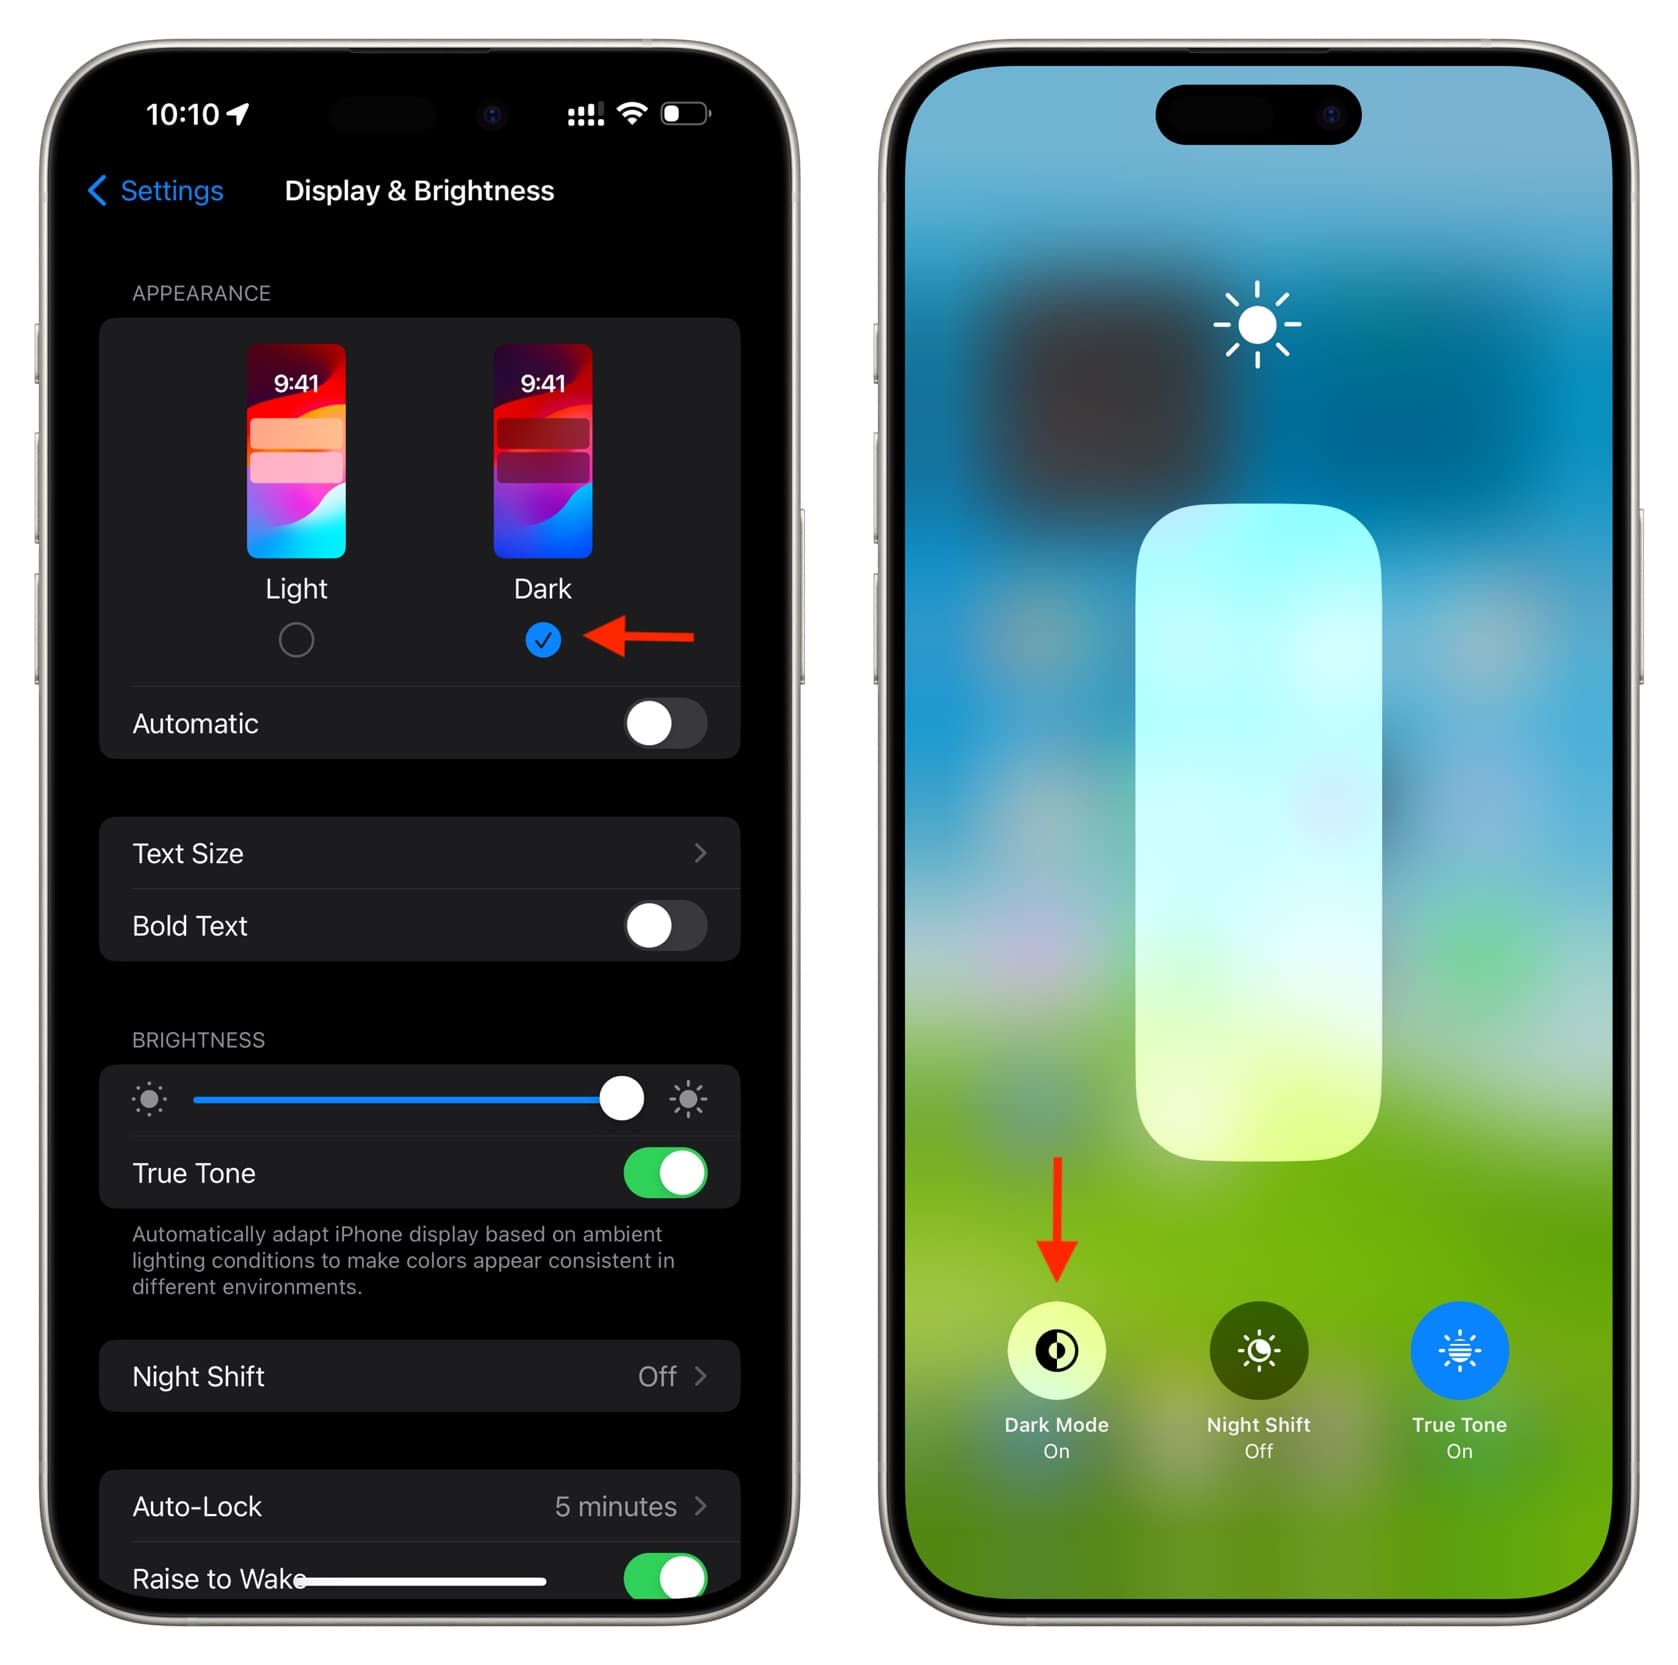 Turn on Dark Mode on iPhone from Settings and Control Center